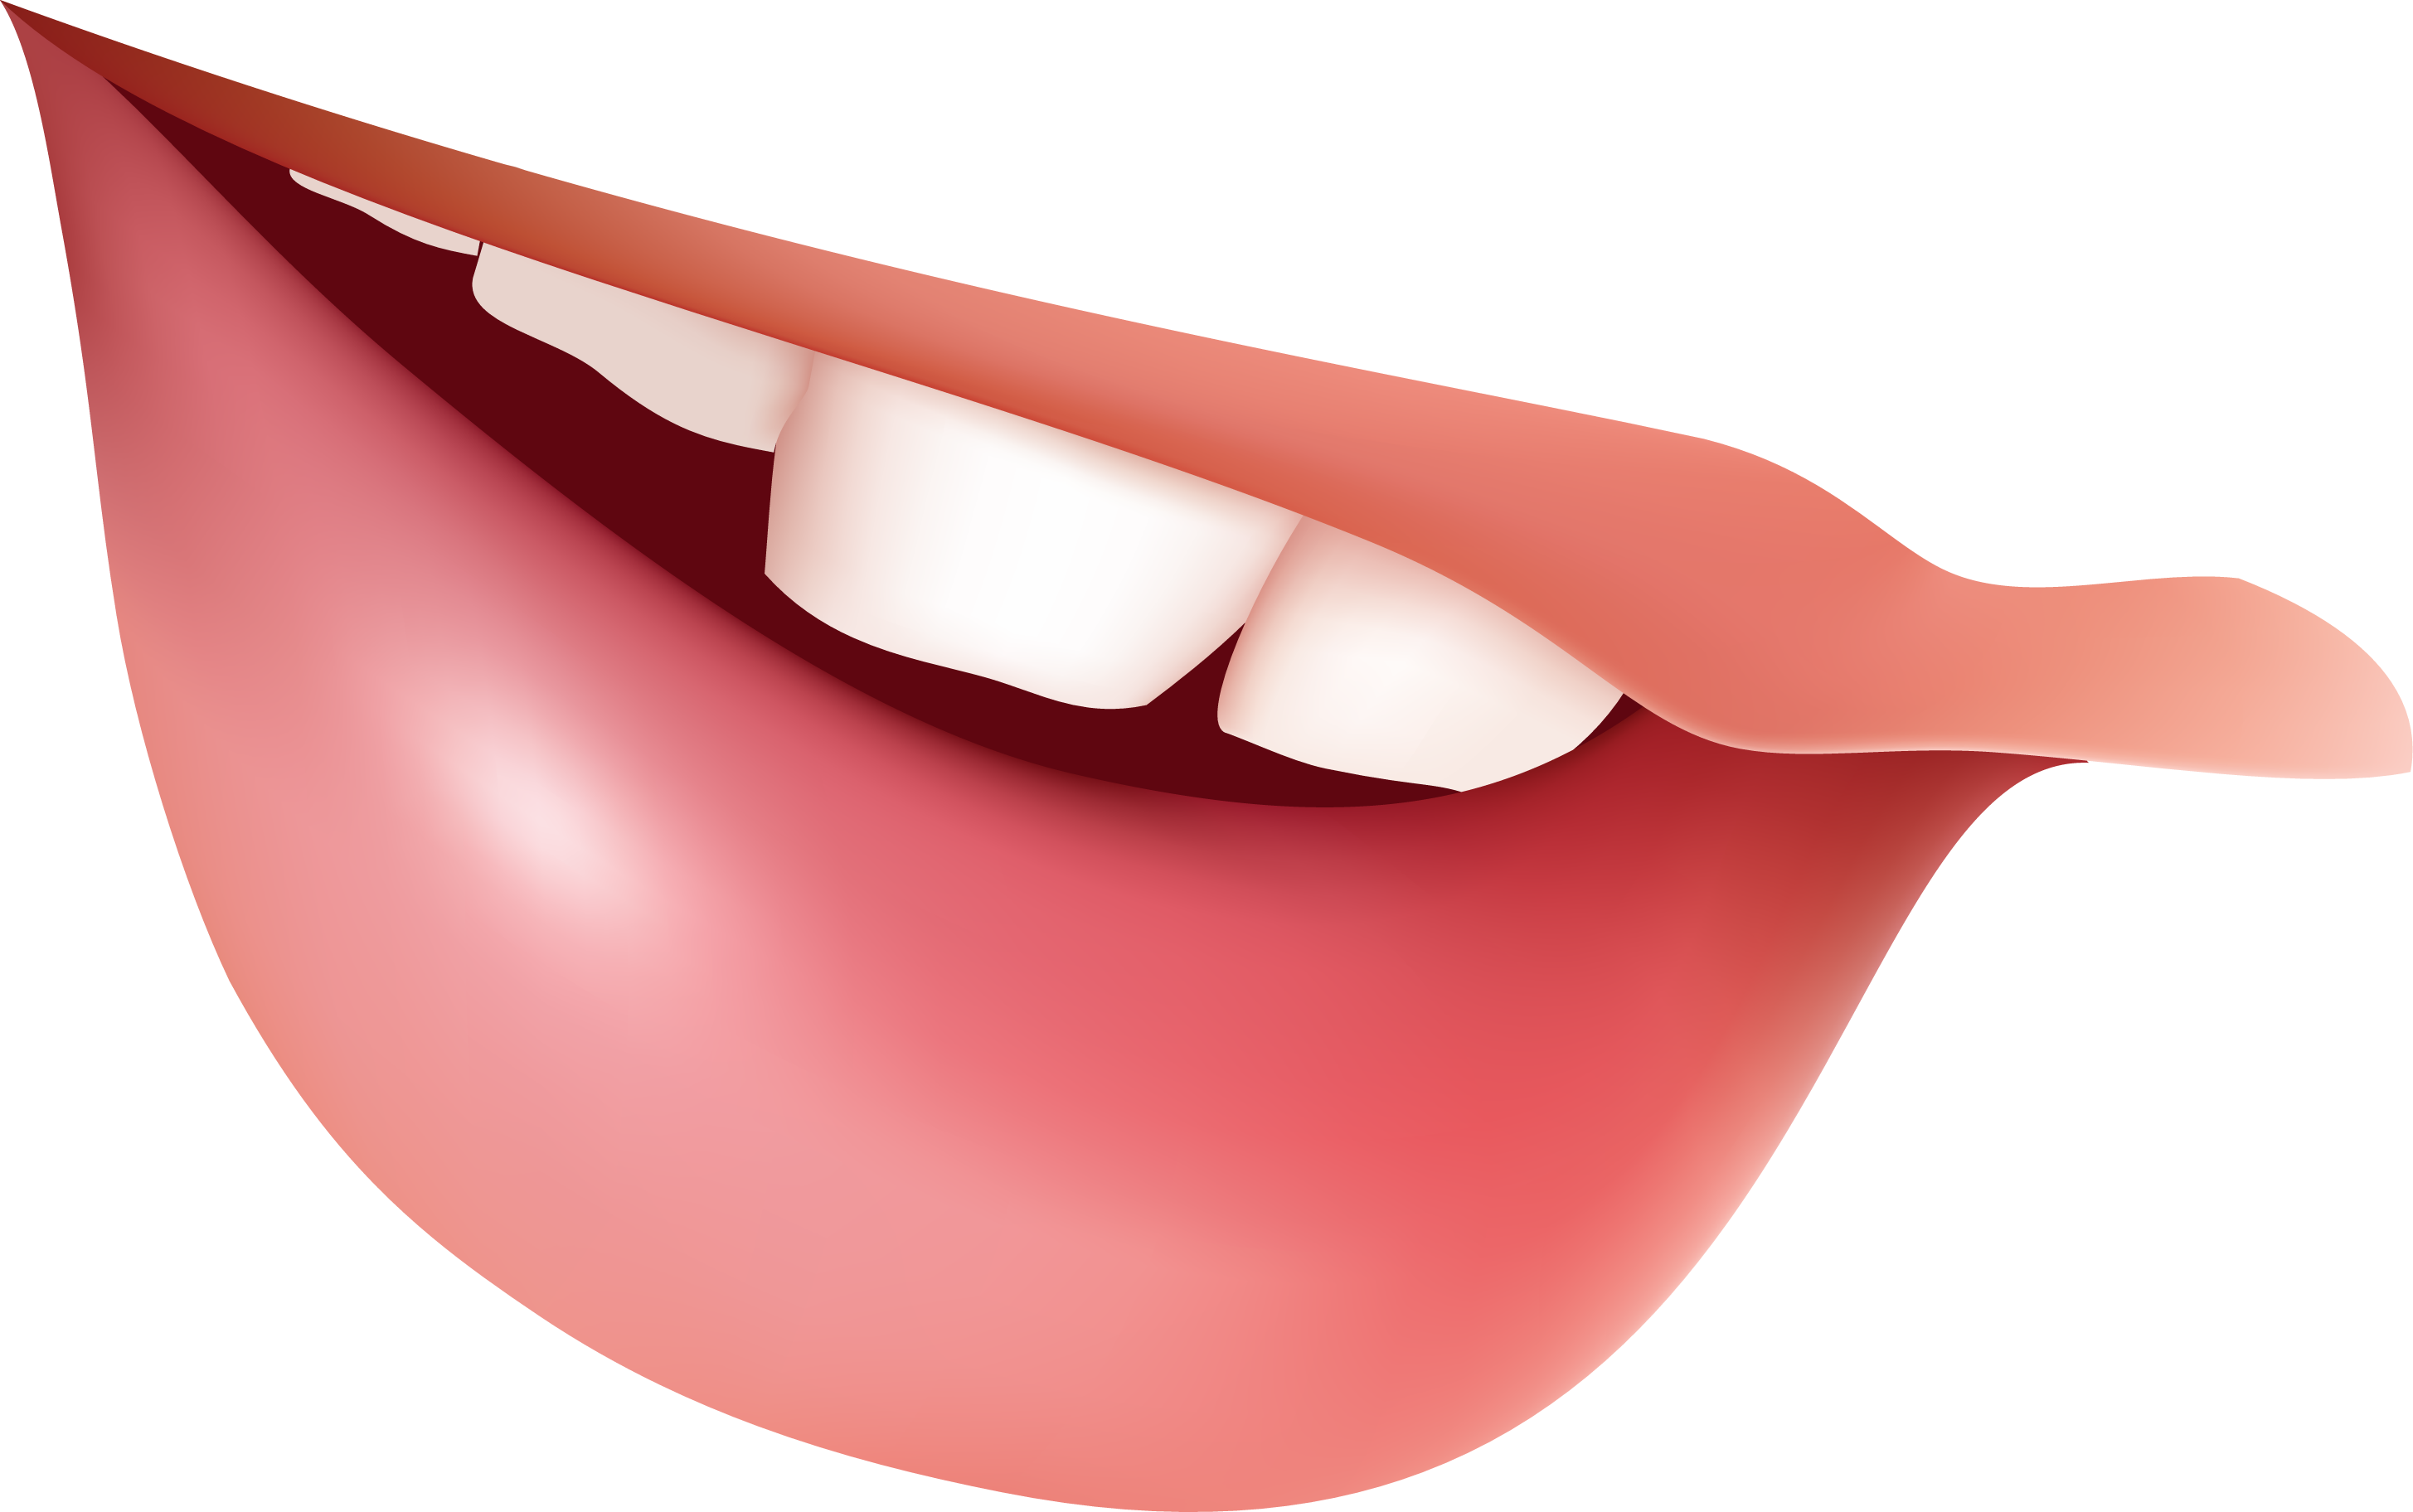 Zipper clipart lips. Teeth png images tooth